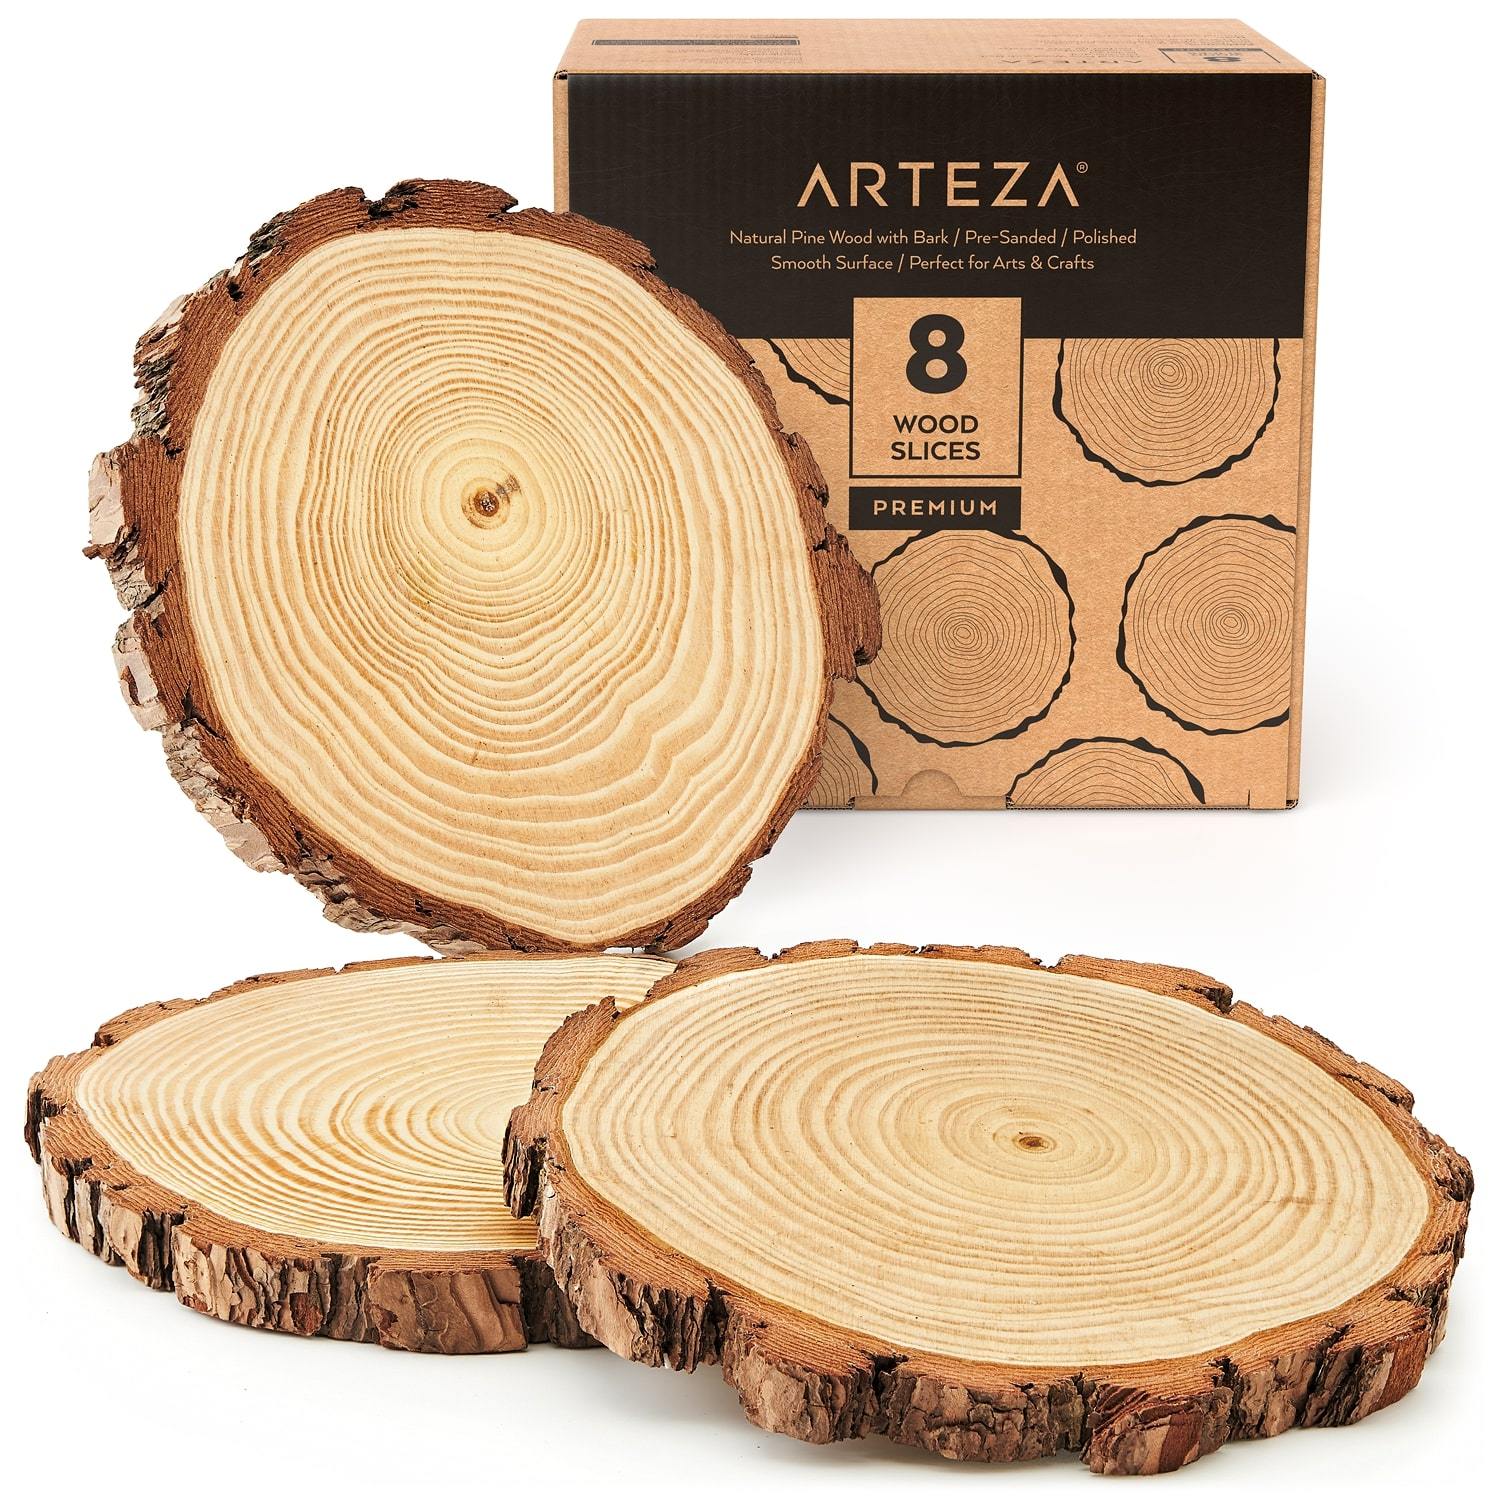 Arteza Large Wood Slices - Set of 8 Size: 0.8 in